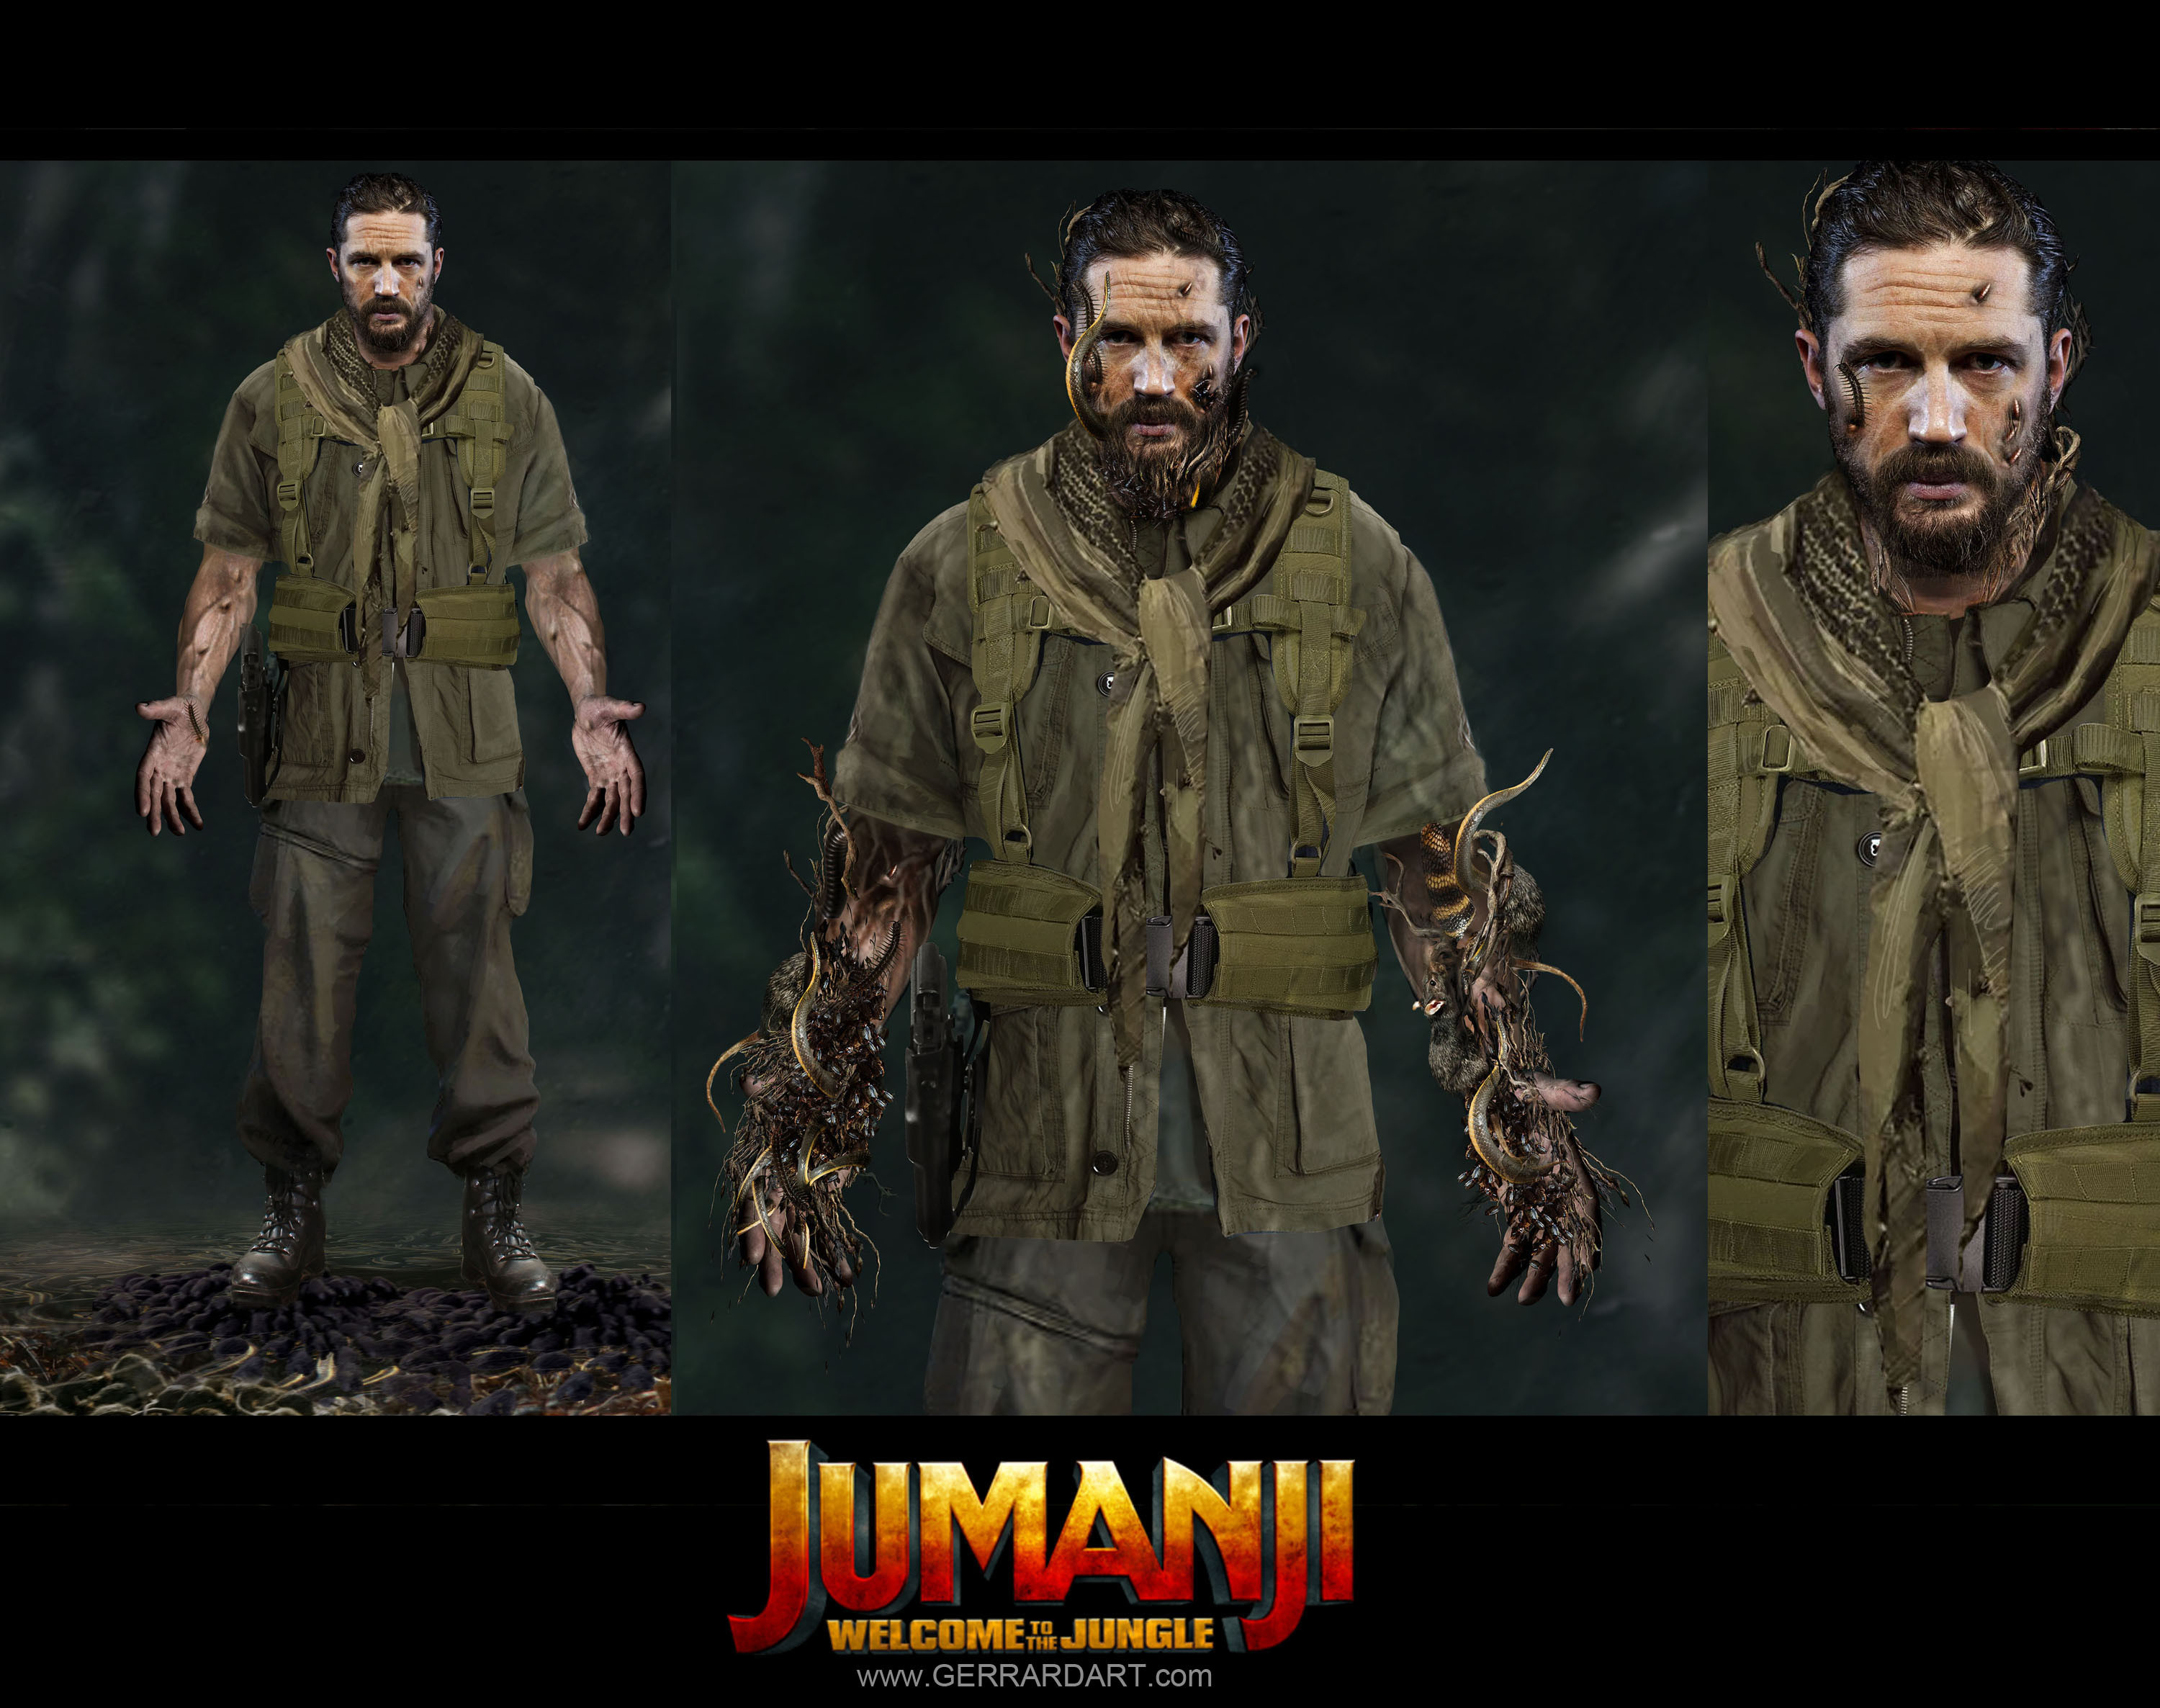 Previously unreleased concept art from the movie JUMANJI. I believe some of these scenes where cut and using an actor that never got cast.
www.GERRARDART.com